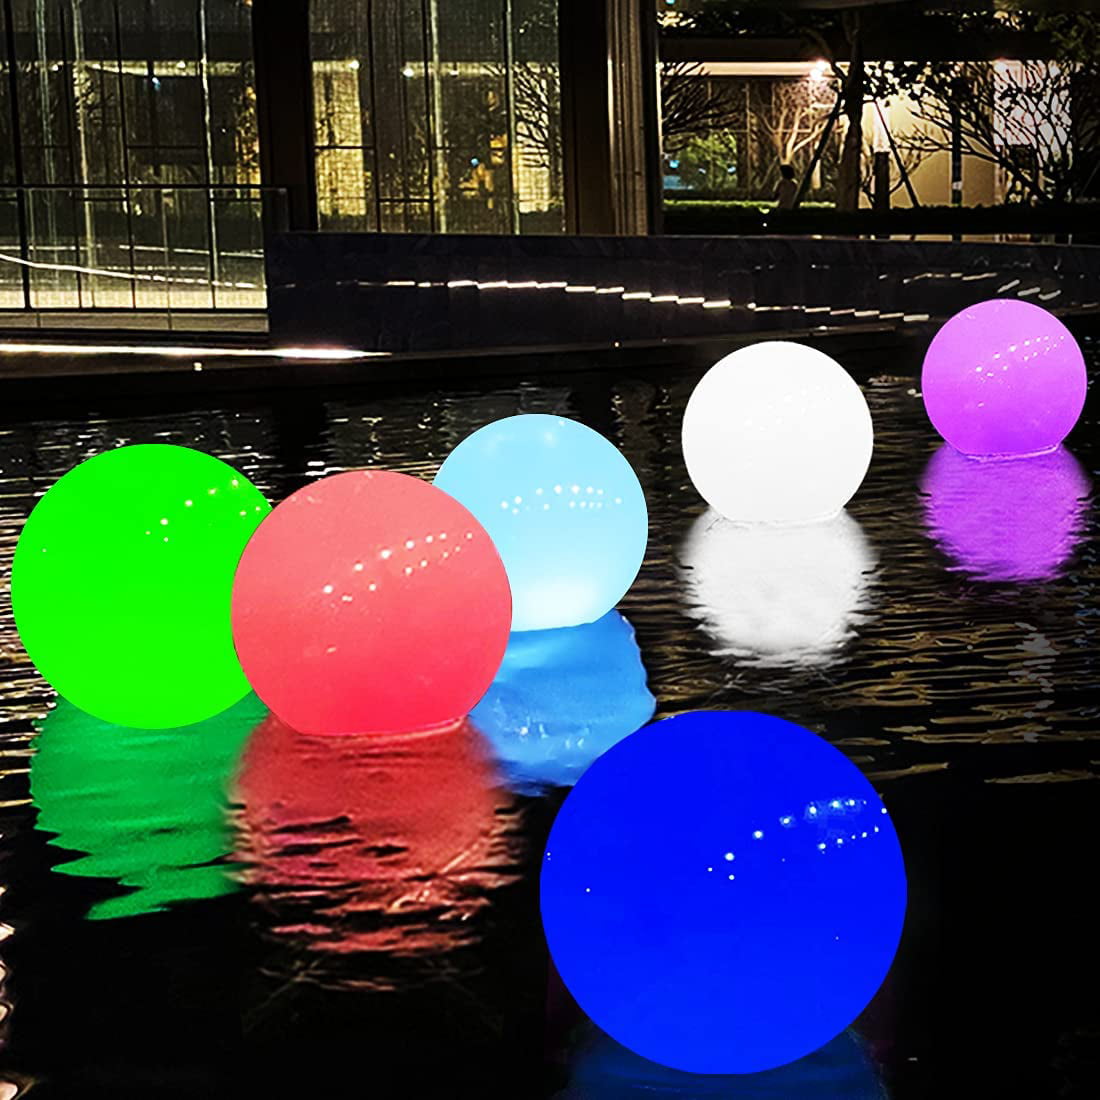 Floating Pool Light Ball Hot Tub Inside and Outside of The House Decor 1PCS RGB Color Changing LED Bathtub Night Light IP68 Waterproof Party Orb Light for Kids Gift Wedding 